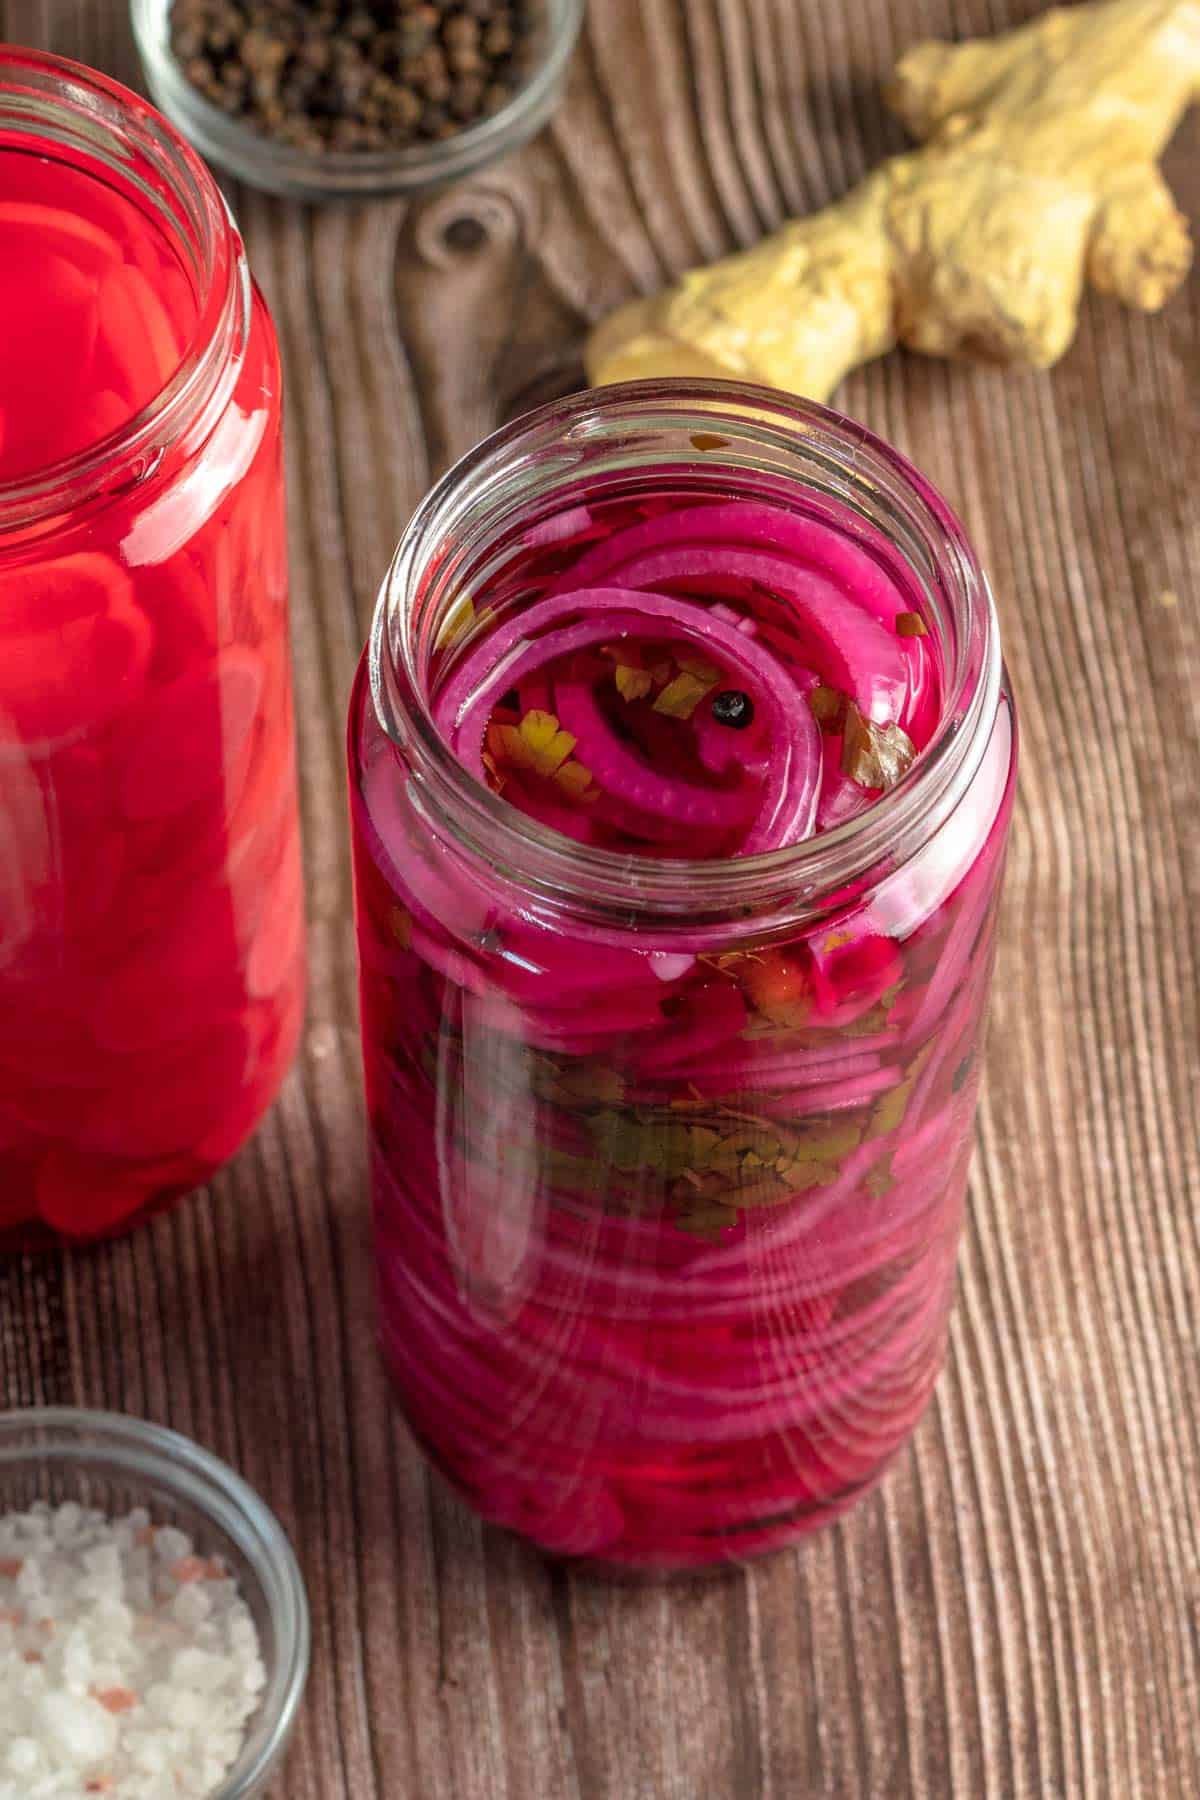 Pickled radish and onions